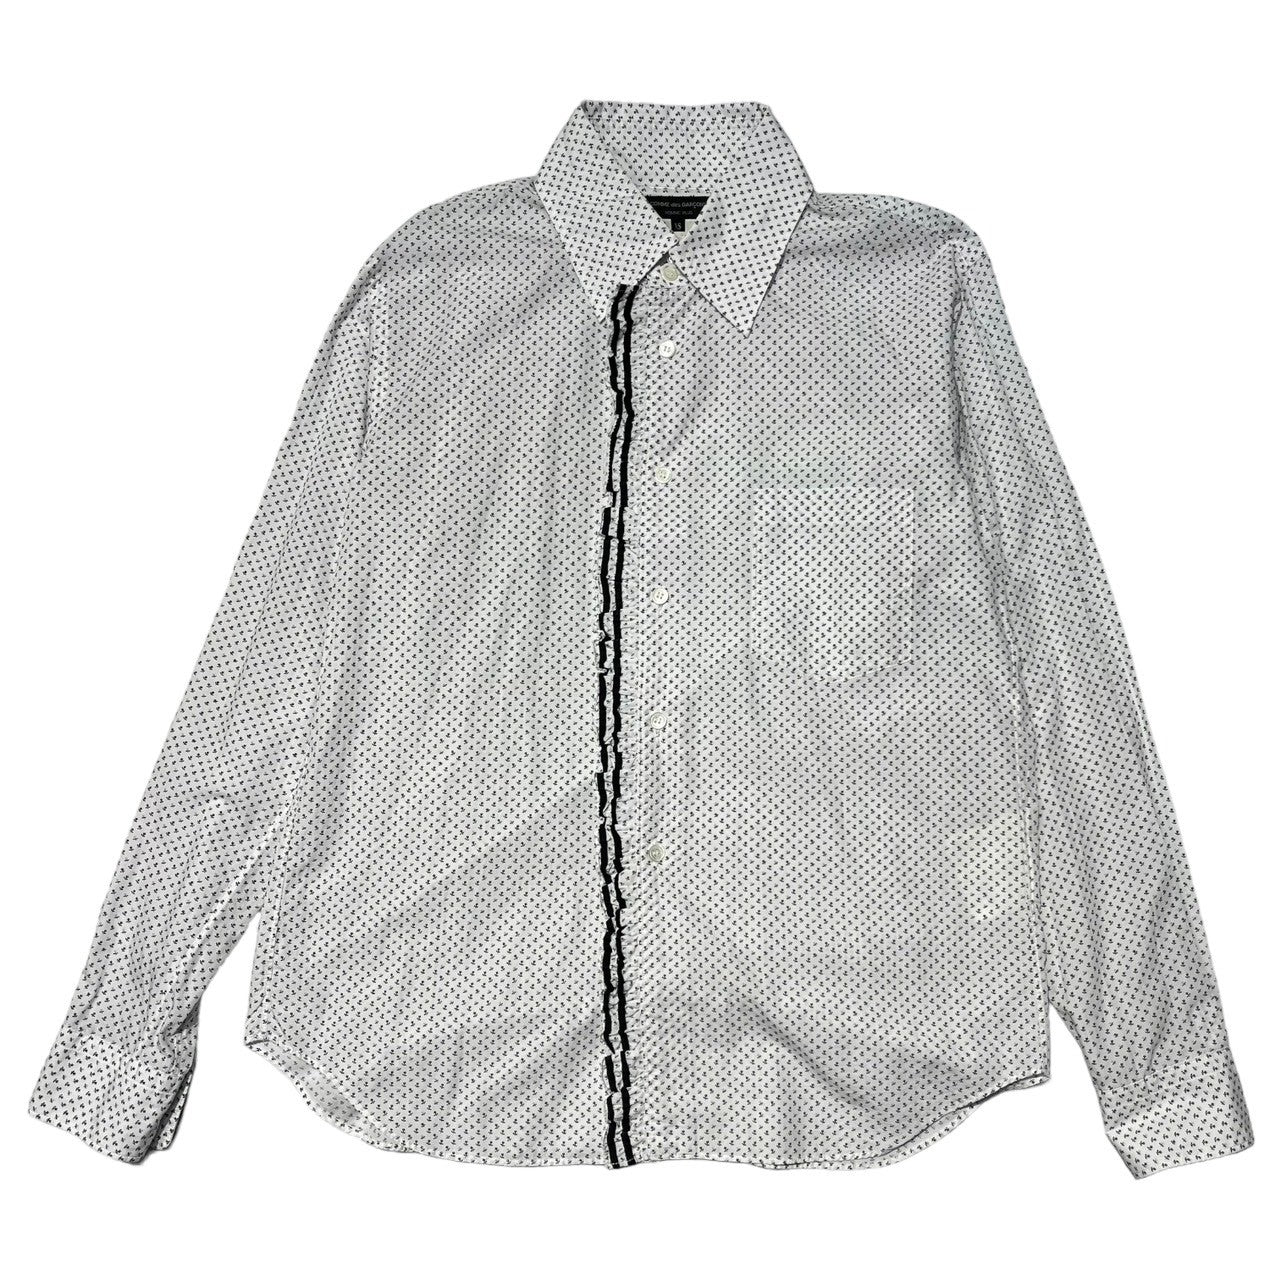 COMME des GARCONS HOMME(コムデギャルソンオム) 03SS striped print shirt ストライププリント